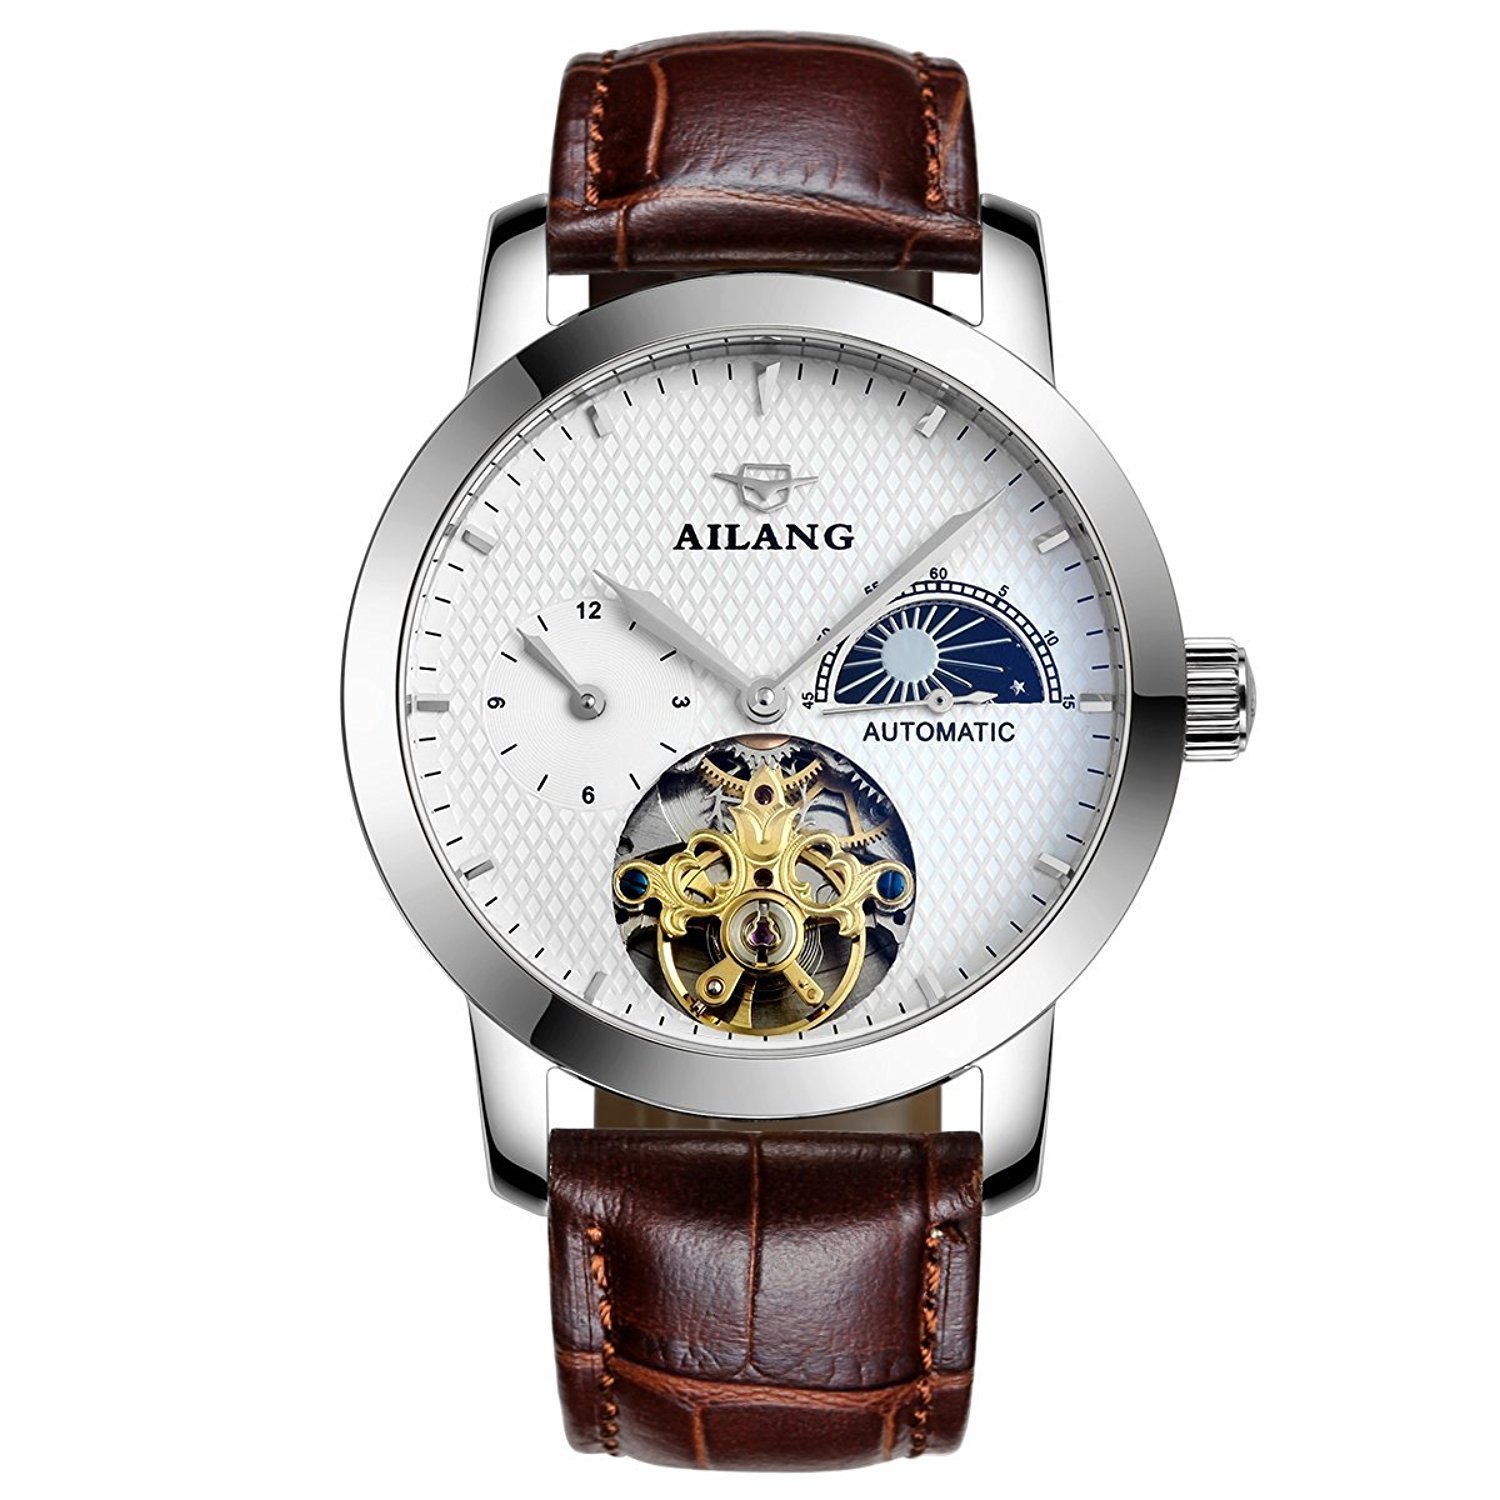 Ailang WhatsWatch Waterproof Men's Silver Moon Phase White Dial Brown Leather Strap Automatic Wrist Watch -330